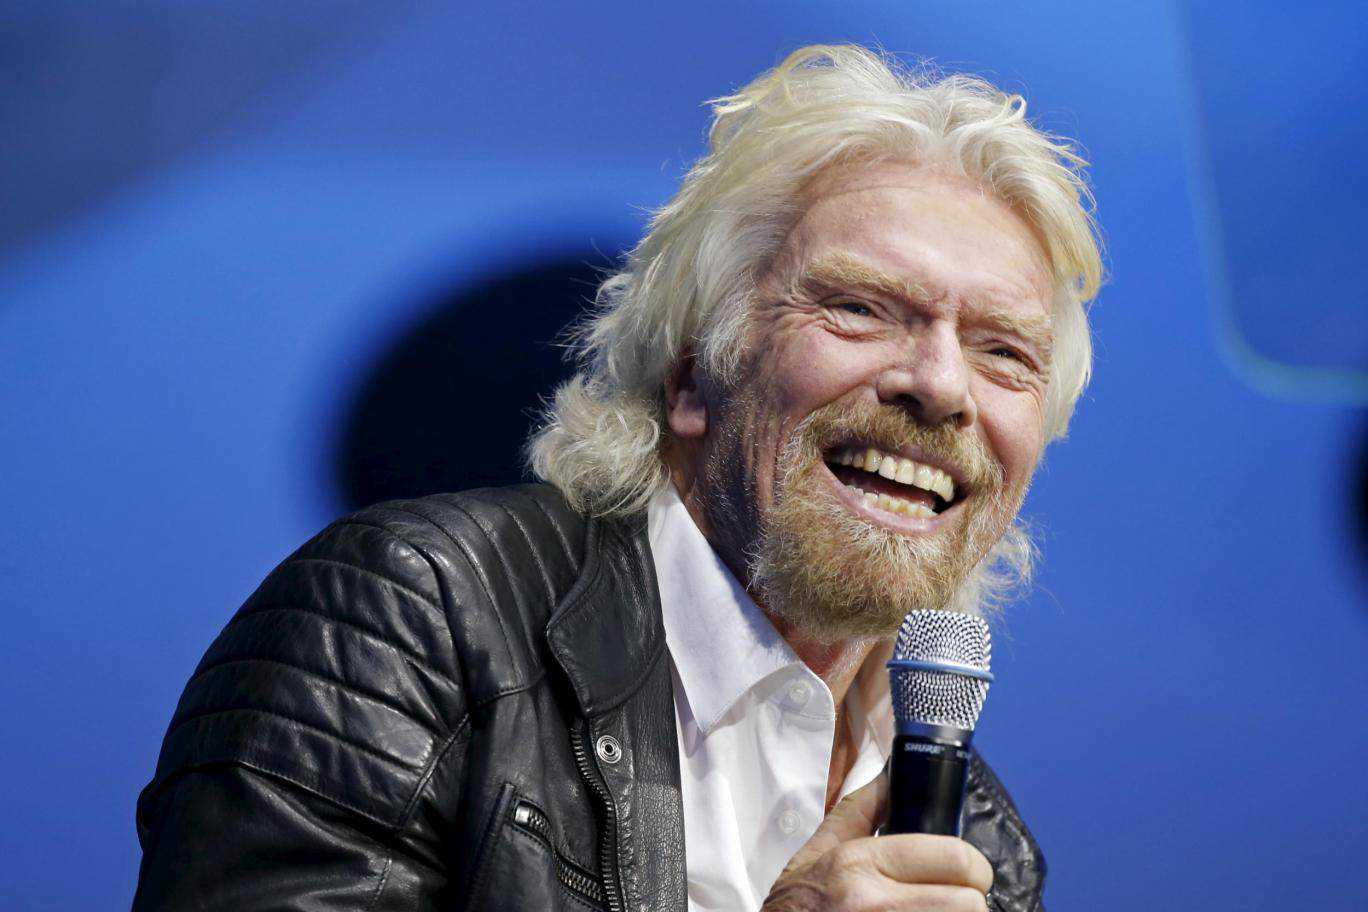 Virgin Care revenues jump 50% thanks to NHS outsourcing contracts